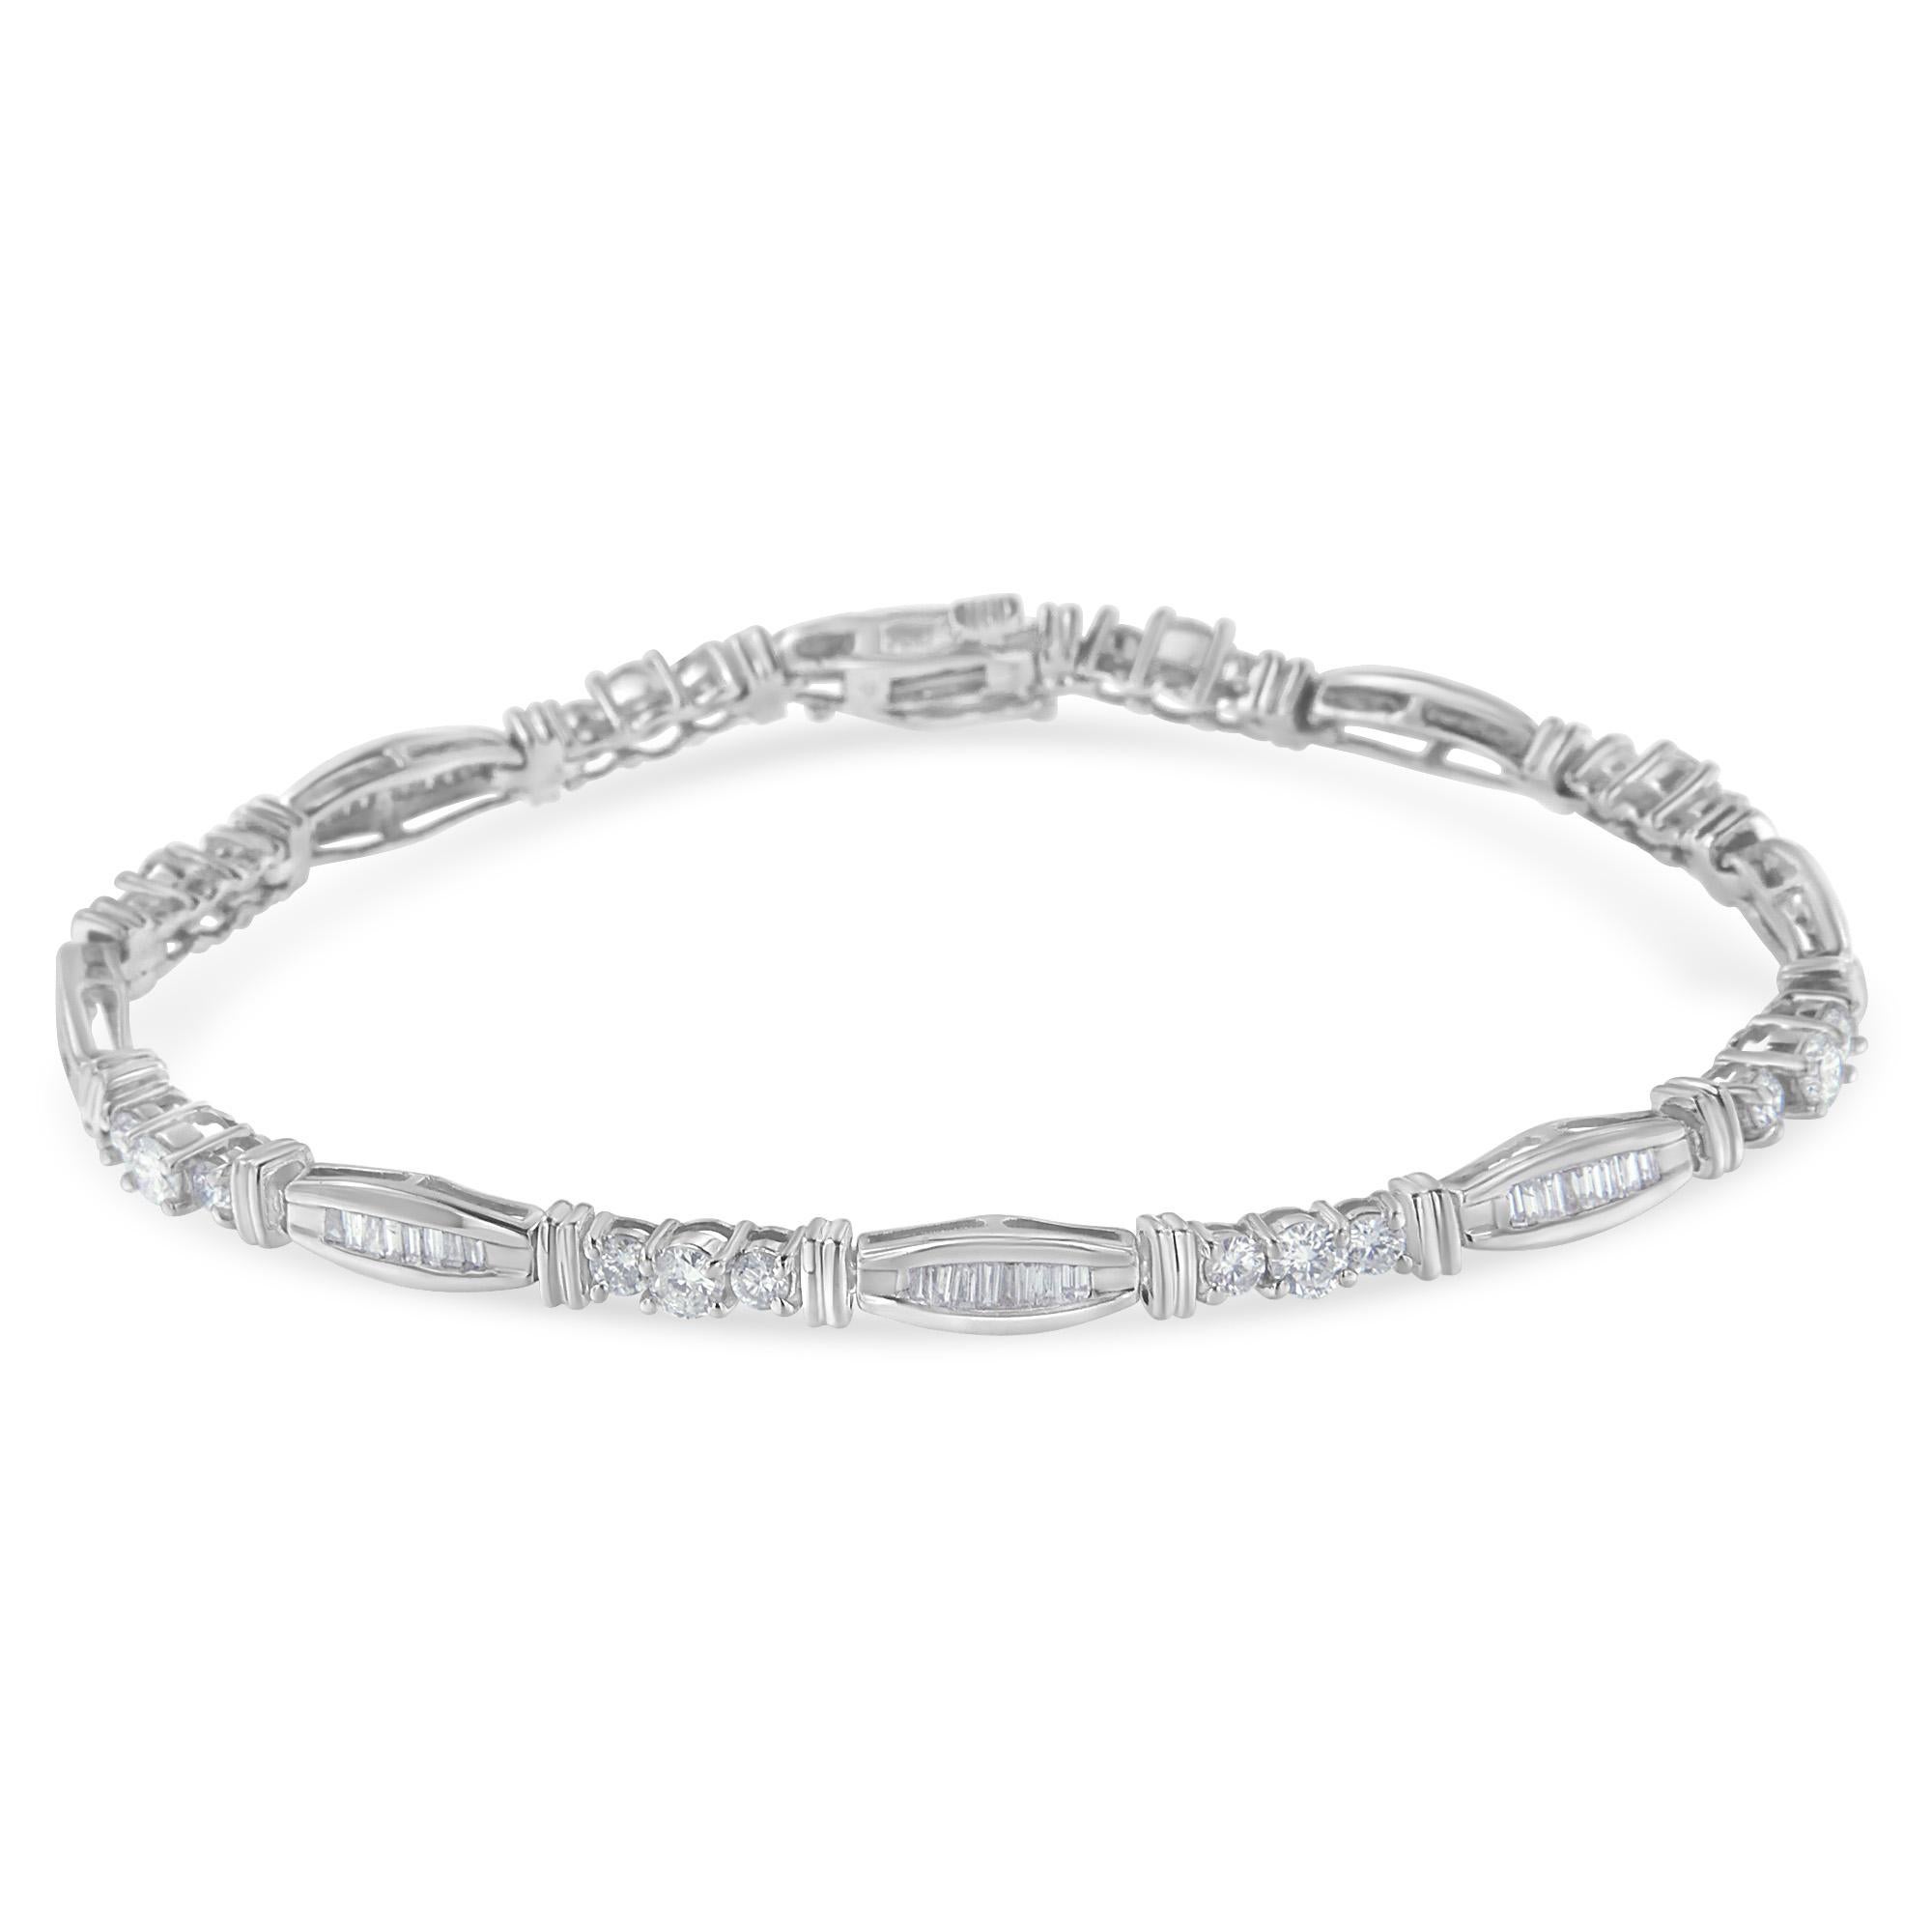 Deluxe tennis bracelet featuring a geometric pattern embellished with 86 genuine diamonds and made with 10k white gold. It presents a 3ct total diamond weight and two different diamond shapes, one with a round cut and a prong setting and the other